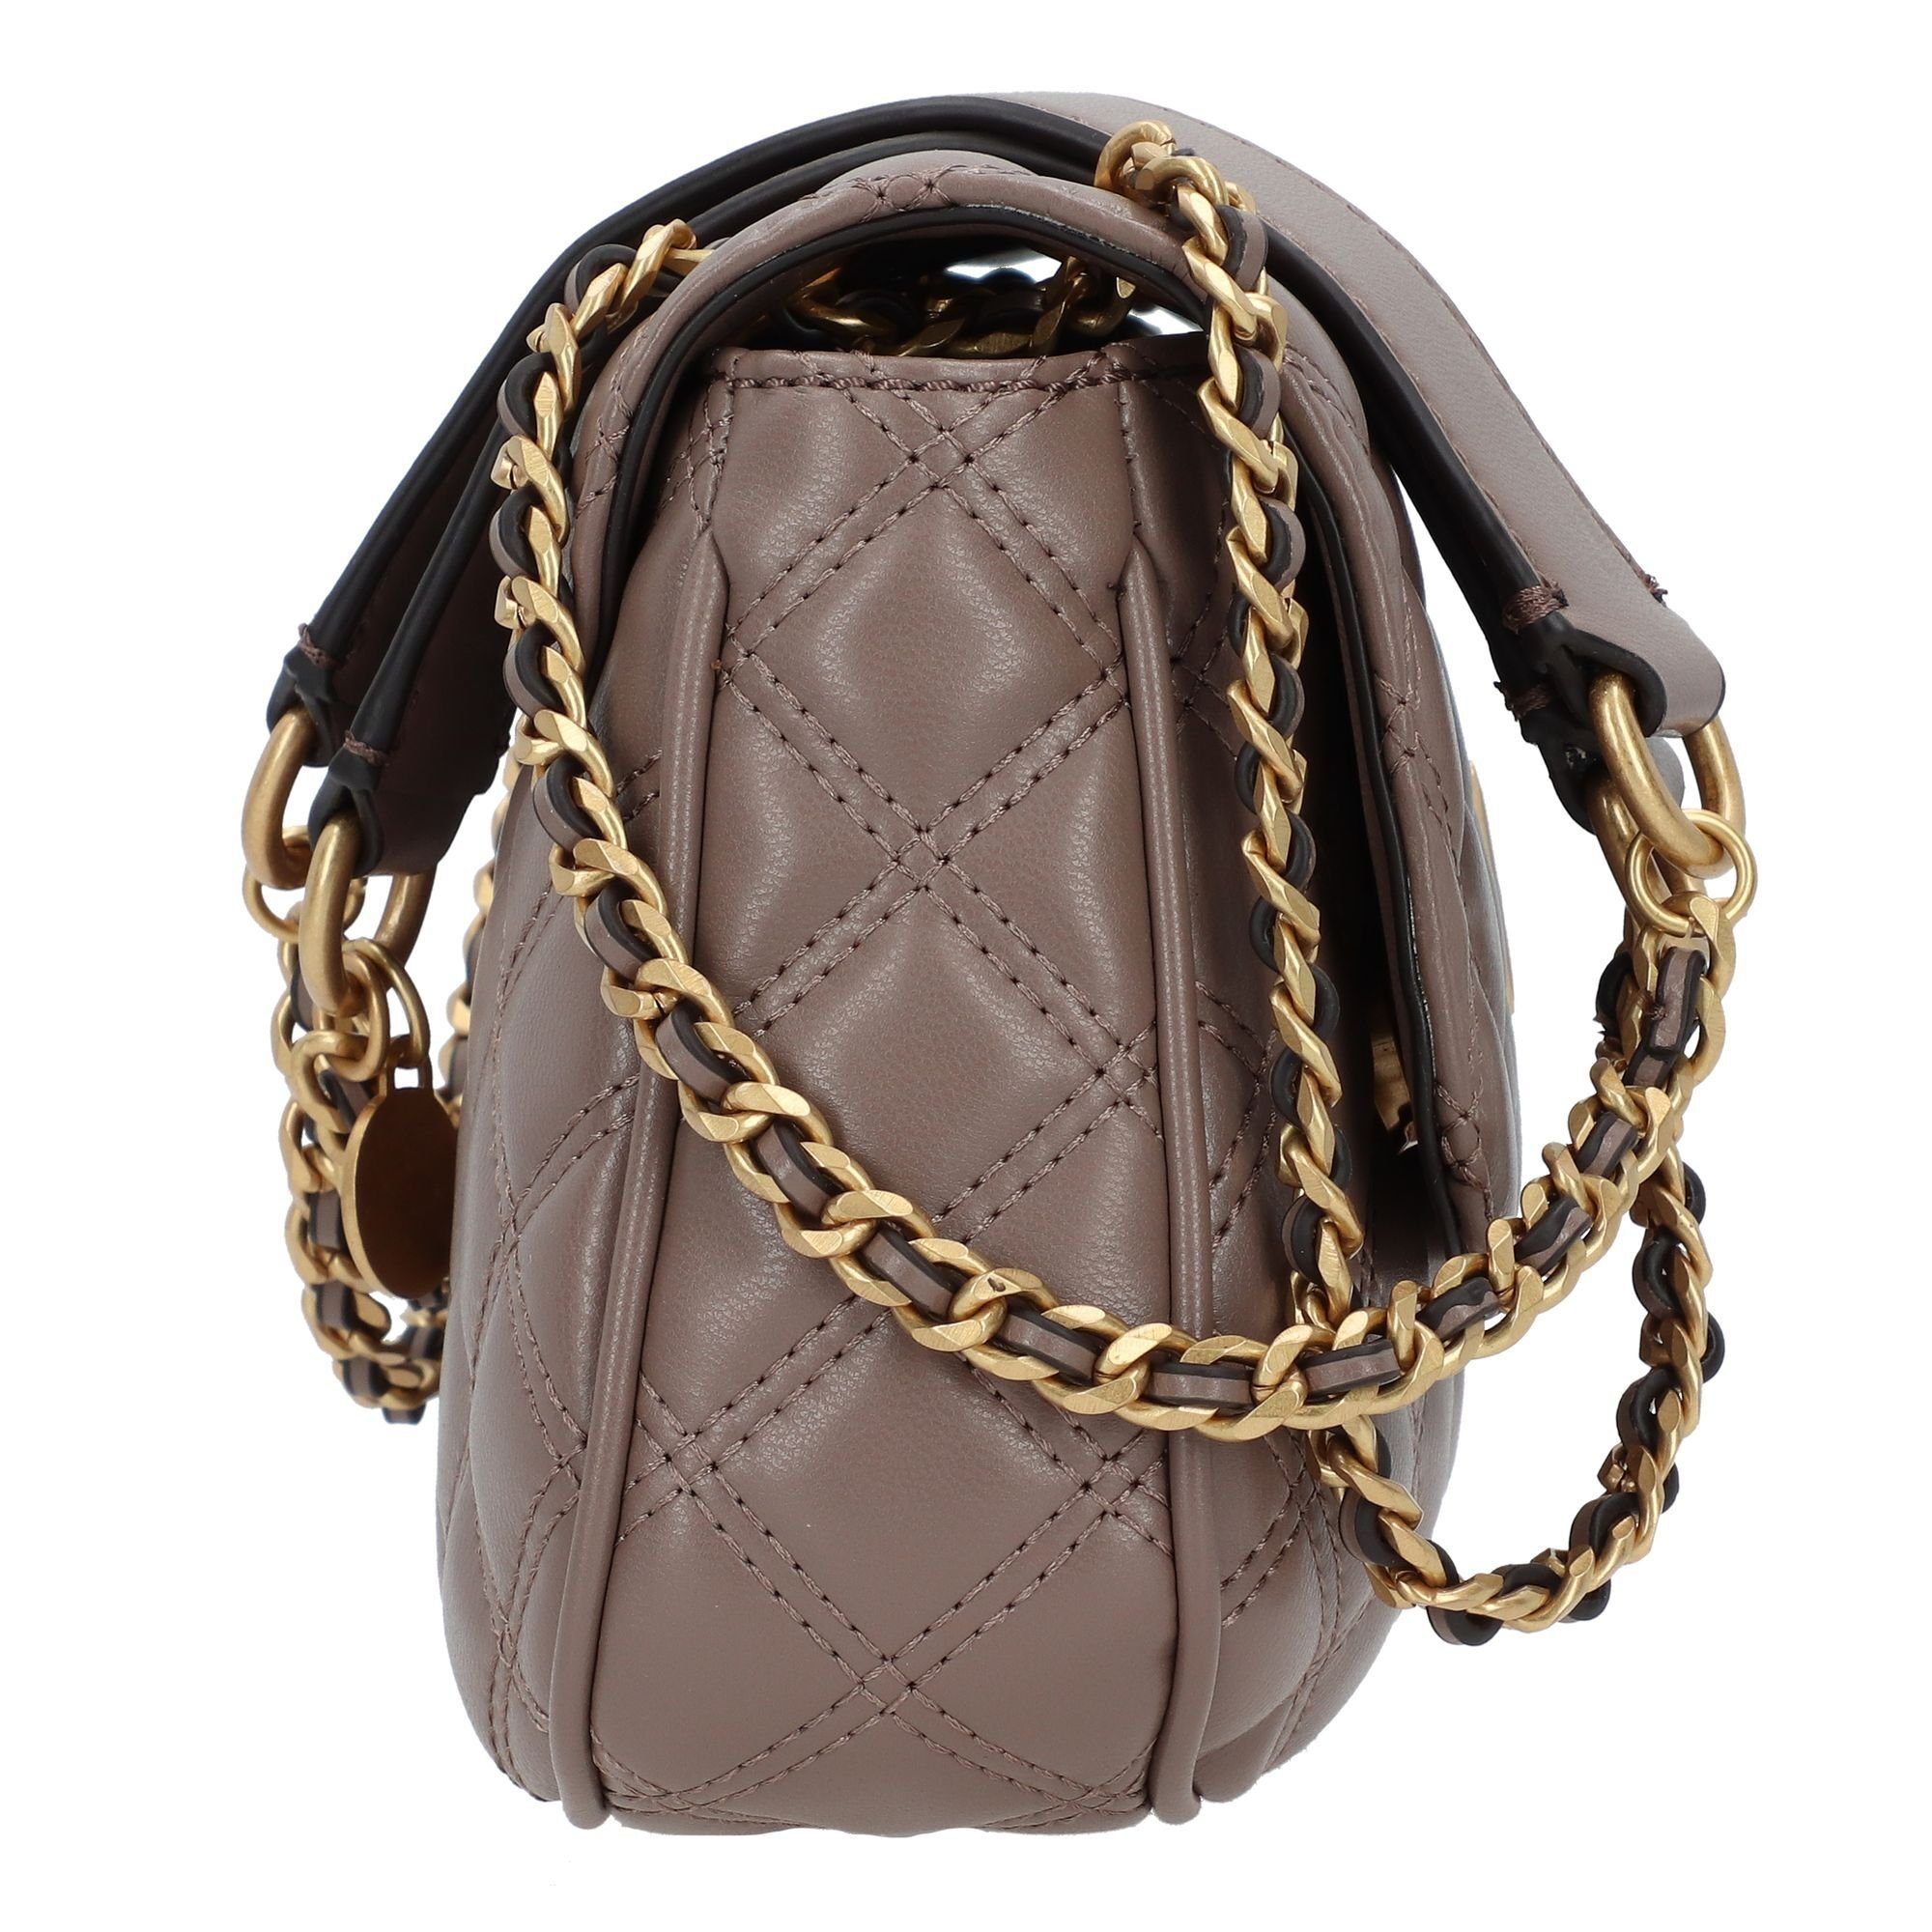 Guess Schultertasche Giully, Polyurethan taupe dark